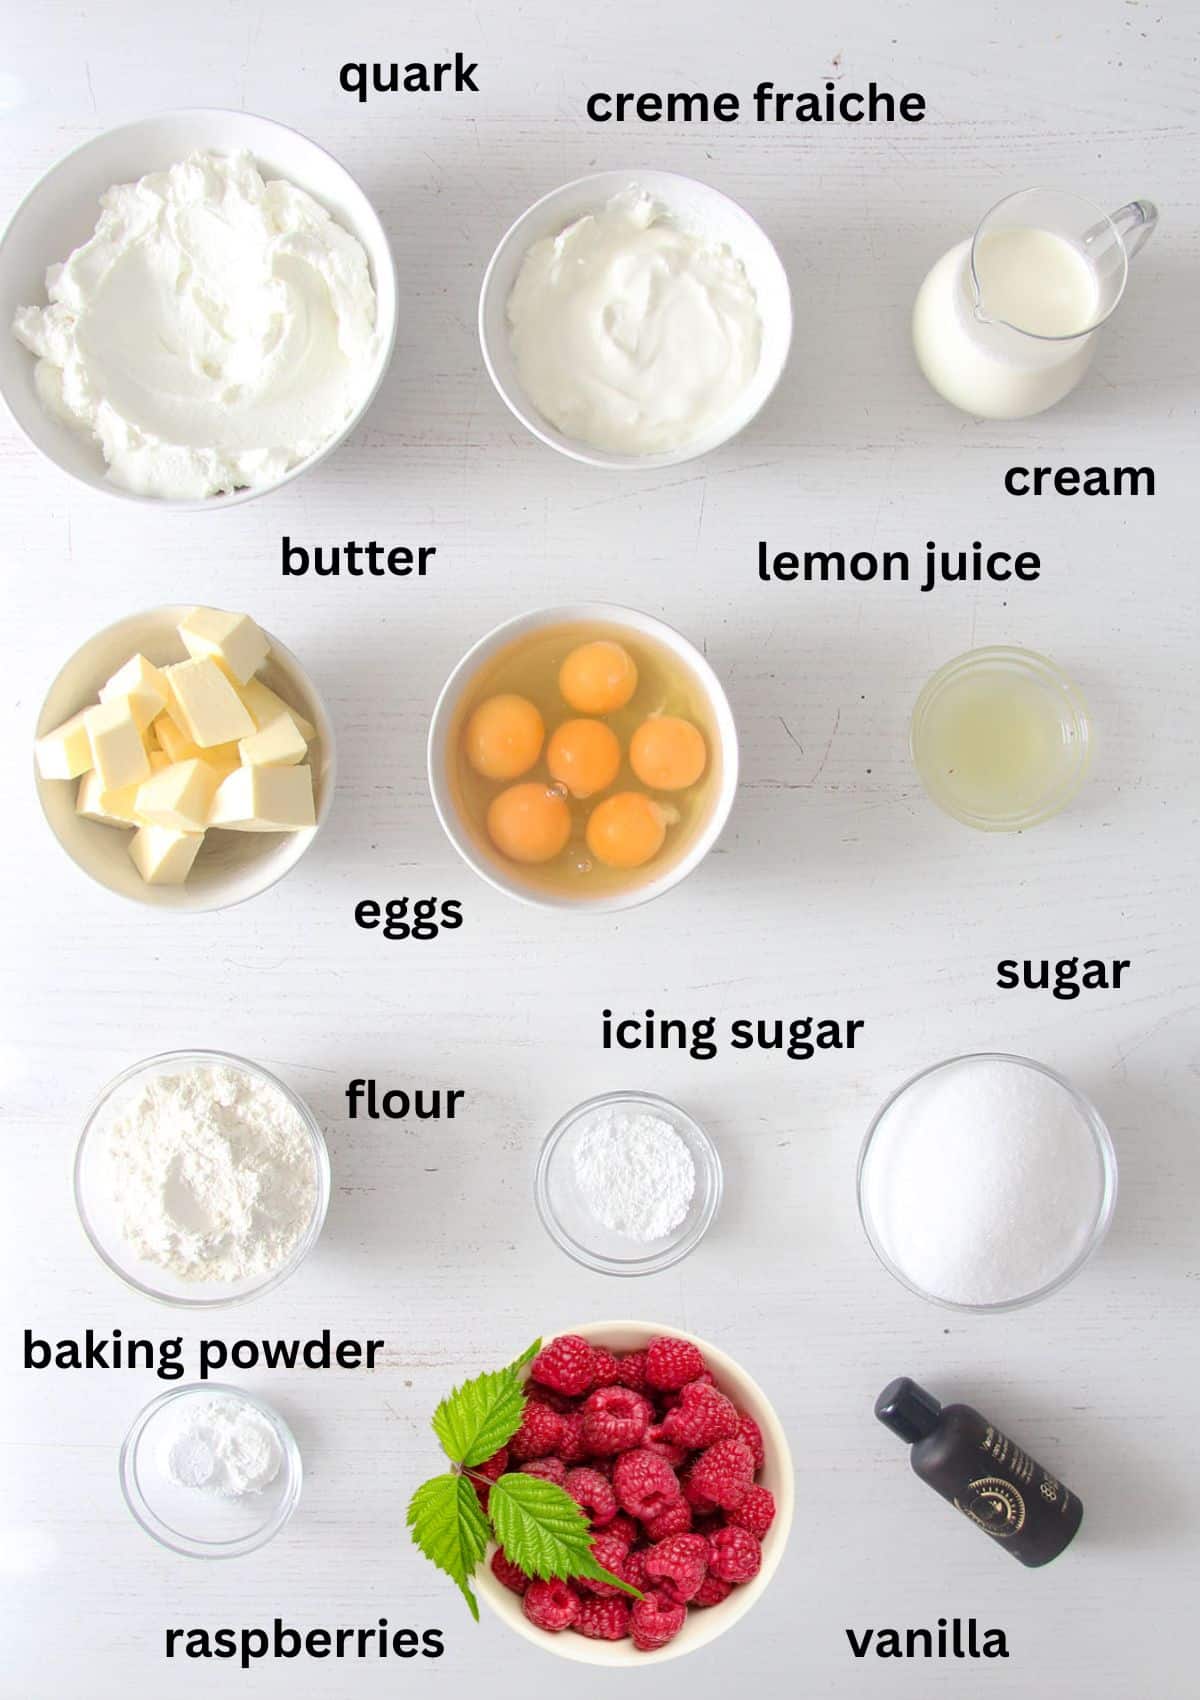 labeled ingredients for making cheesecake with fresh raspberries.